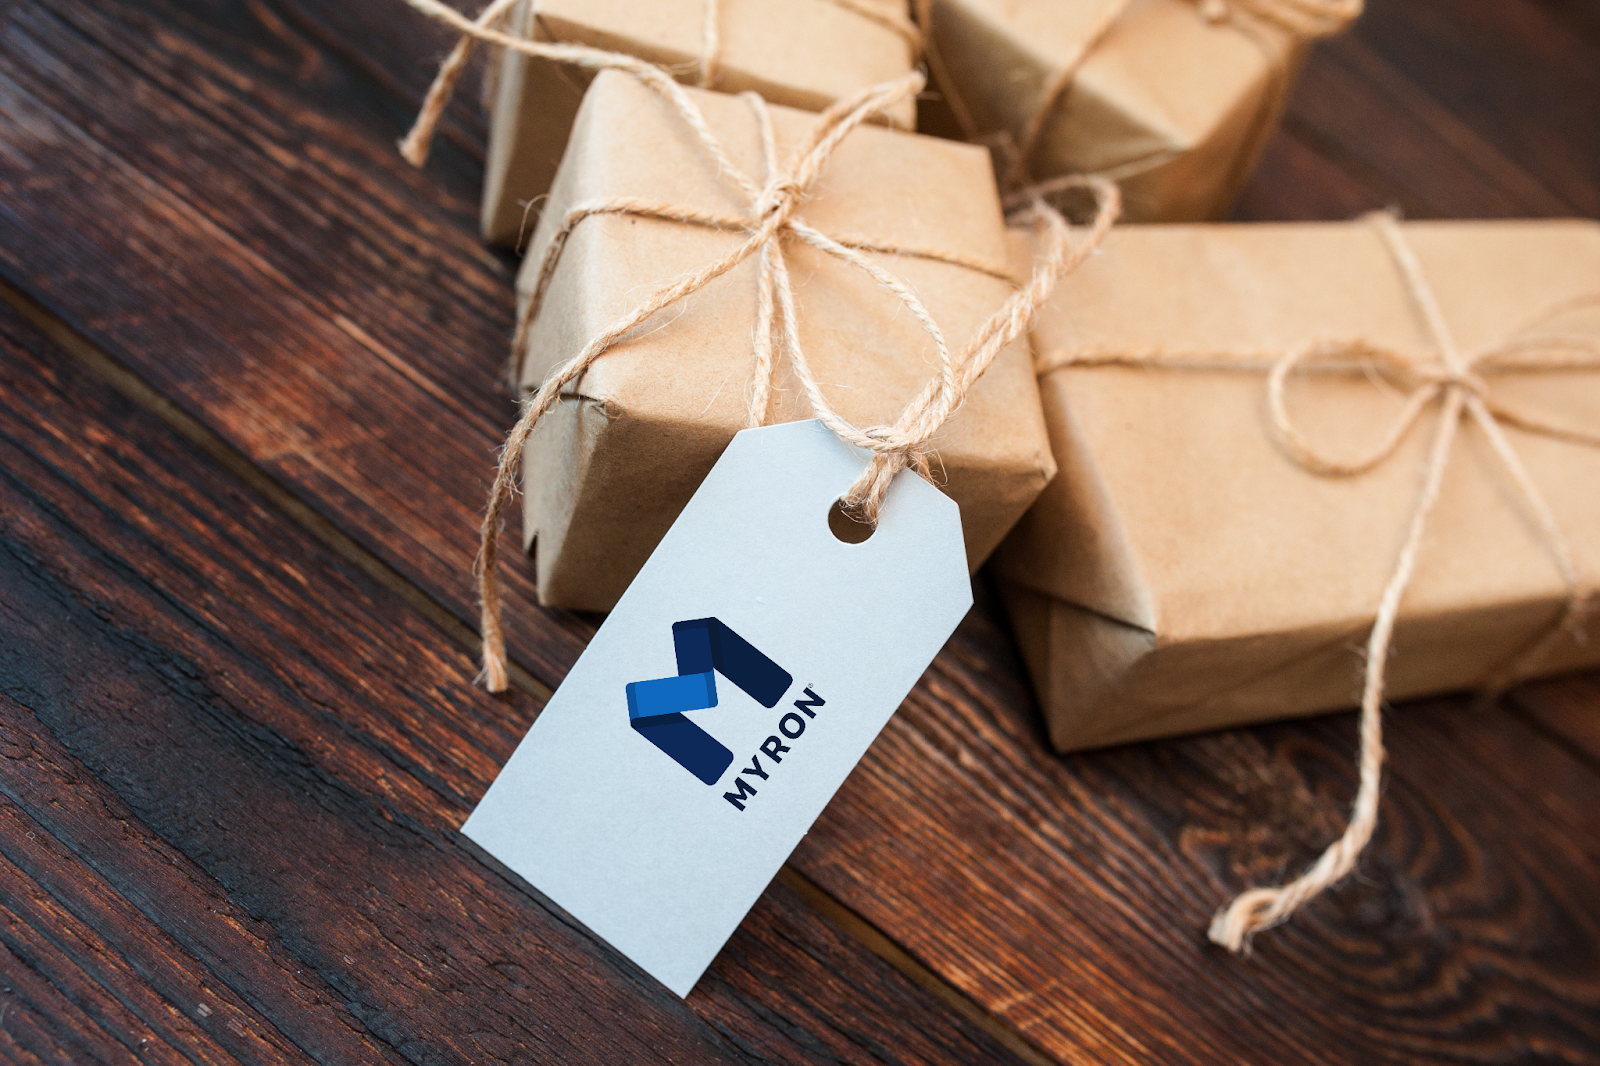 Gift ideas for business partners